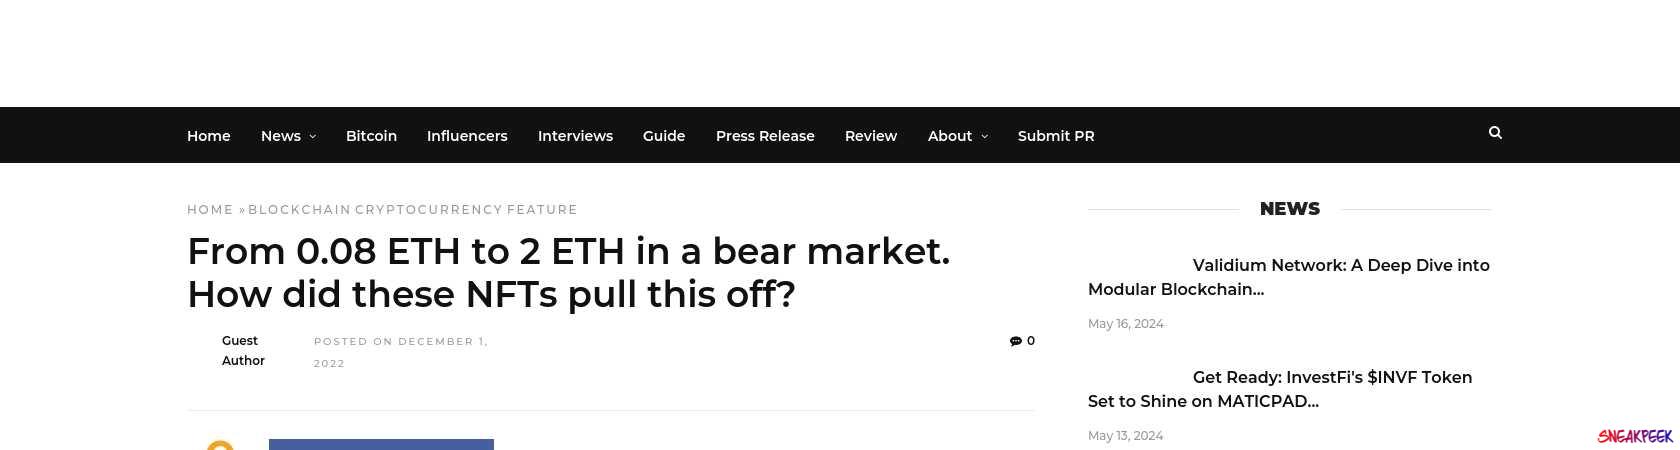 Read the full Article:  ⭲ From 0.08 ETH to 2 ETH in a bear market. How did these NFTs pull this off?